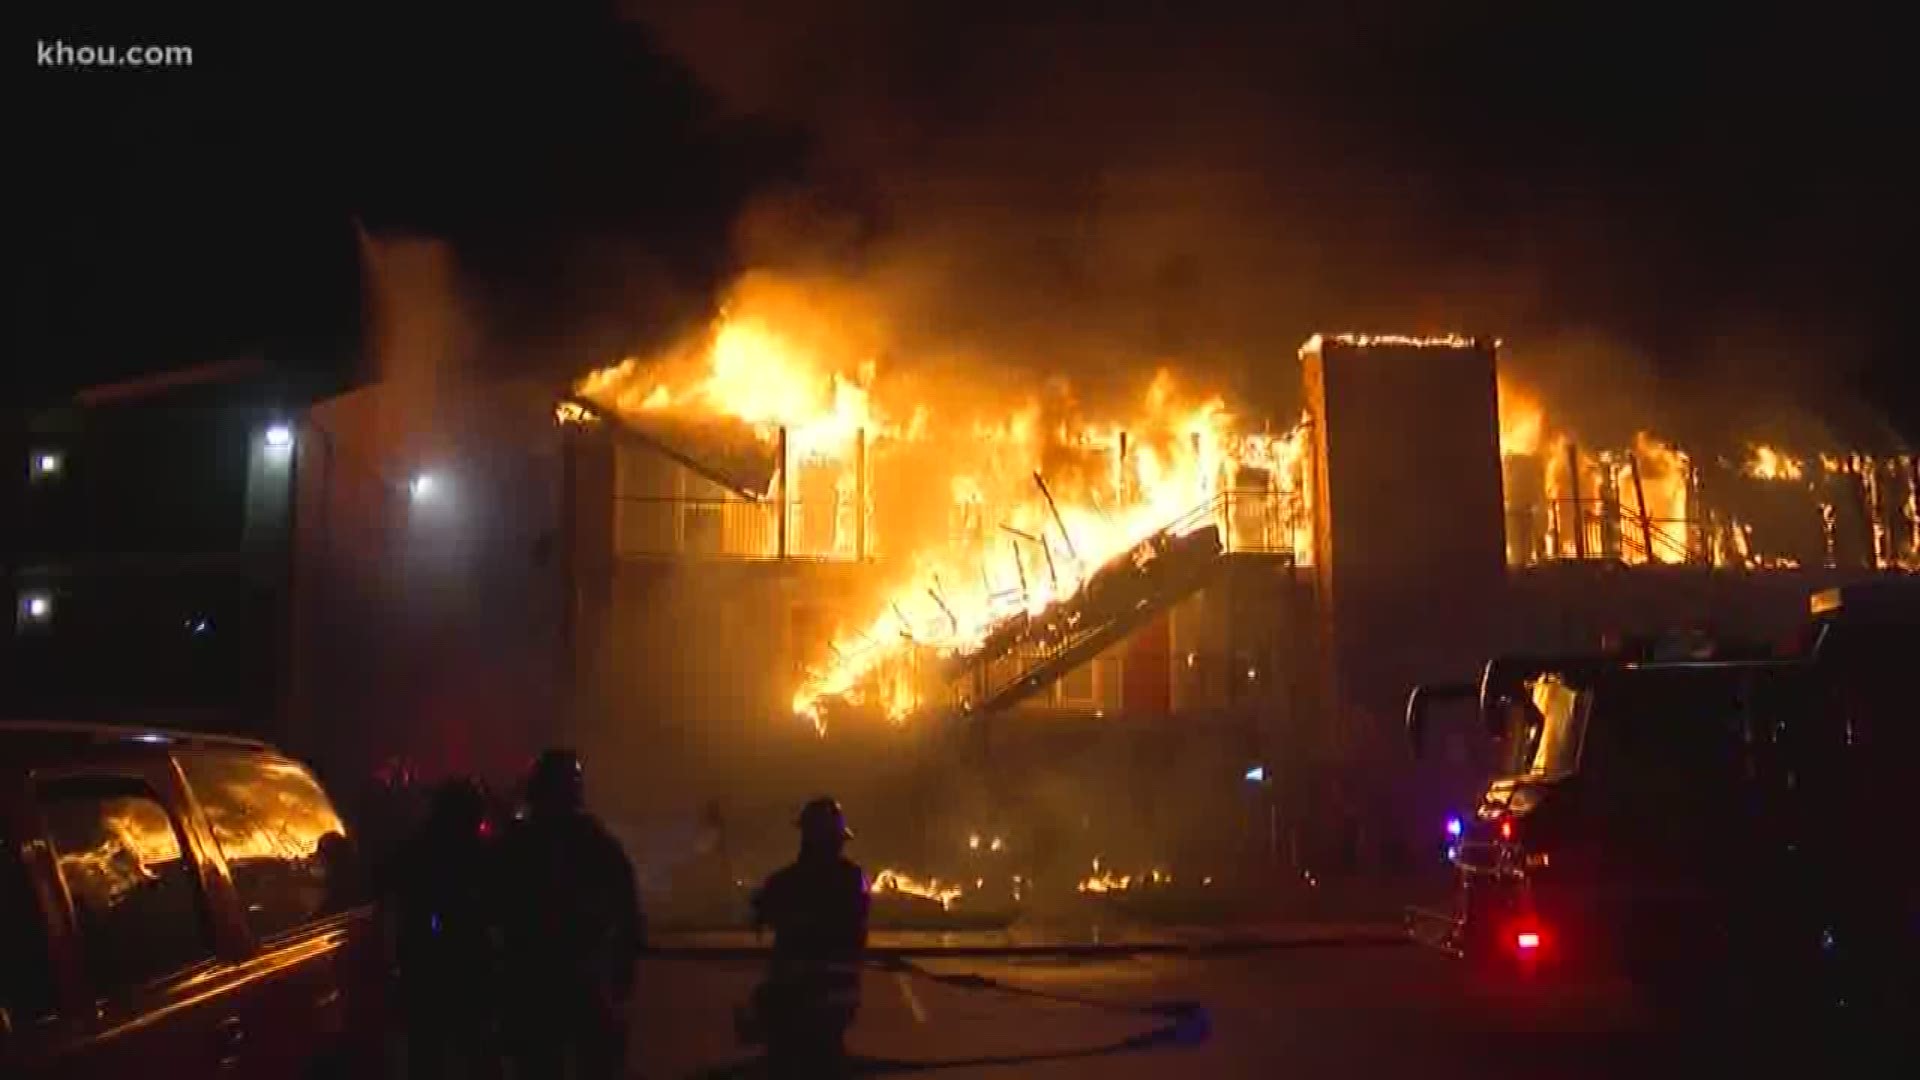 Fire crews battle a multi-alarm apartment fire in Northeast Harris County, HISD is dealing with a teacher shortage and Chita has the weekend forecast,  these are some of the top headlines from #HTownRush at 4:30 a.m.